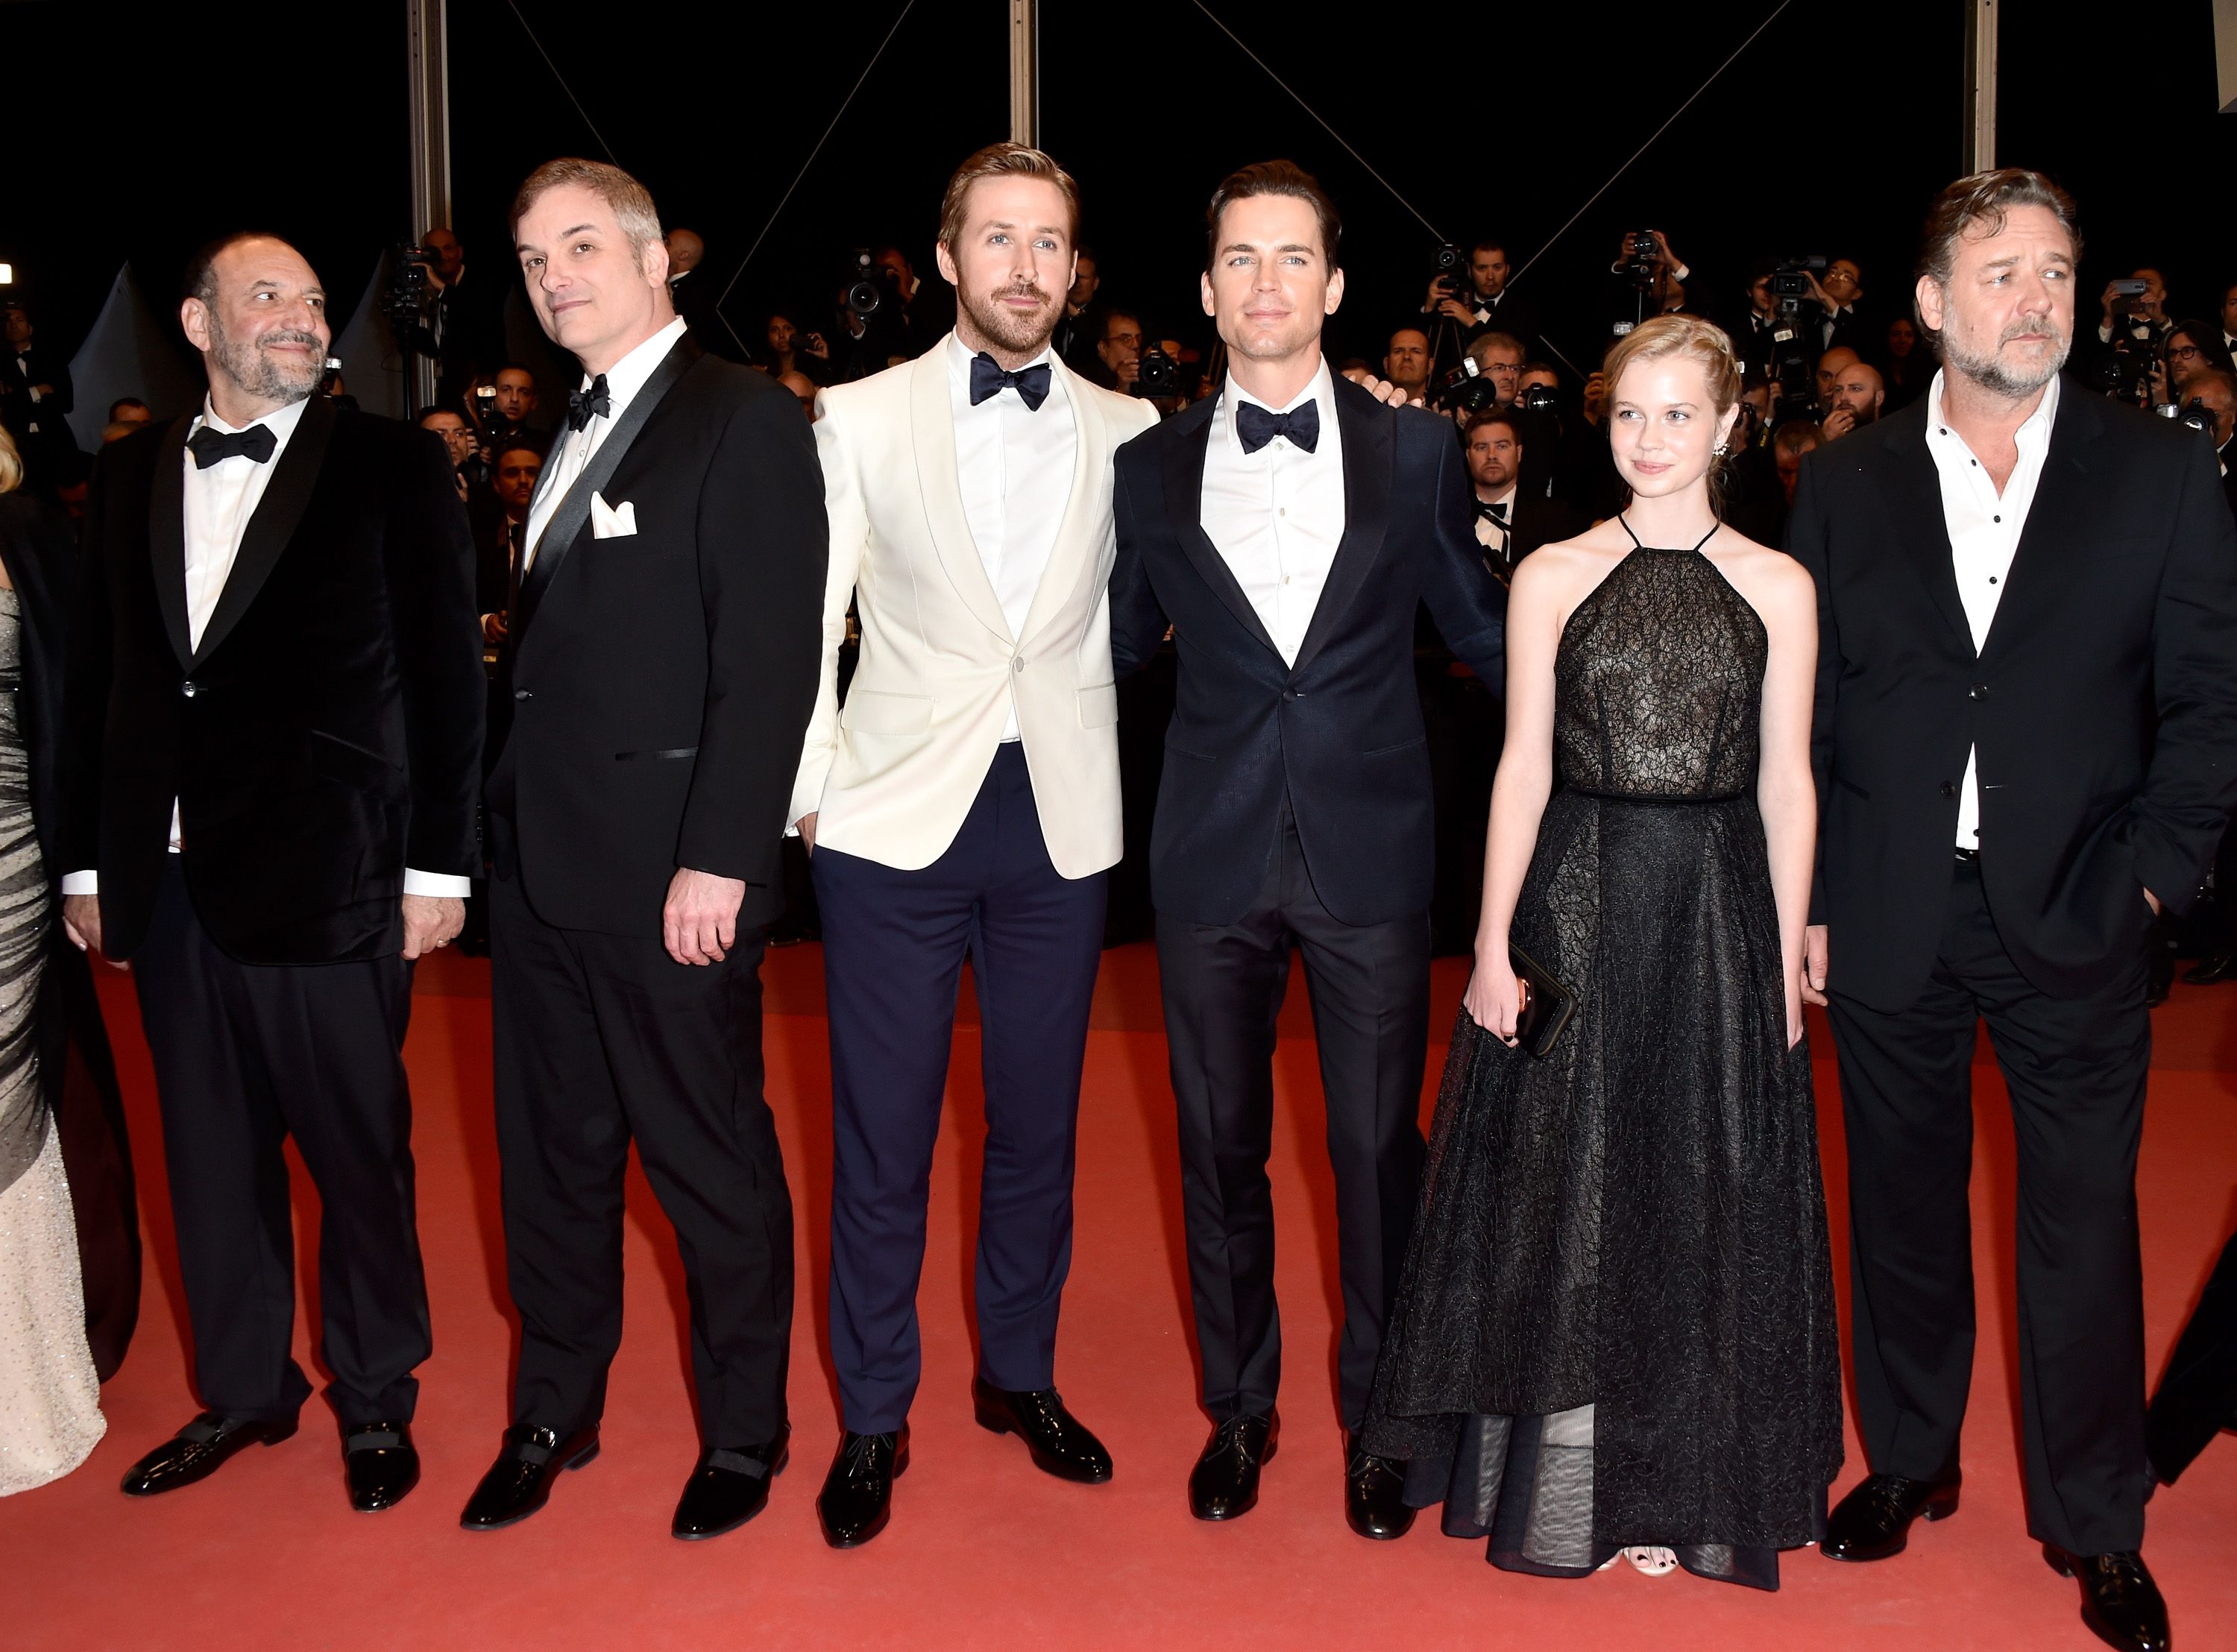 CANNES, FRANCE - MAY 15: (L-R) Producer Joel Silver, director Shane Black, actors Ryan Gosling, Matt Bomer, Angourie Rice and Russell Crowe attend "The Nice Guys" Premiere during the 69th annual Cannes Film Festival at the Palais des Festivals on May 15, 2016 in Cannes, France. (Photo by Pascal Le Segretain/Getty Images)